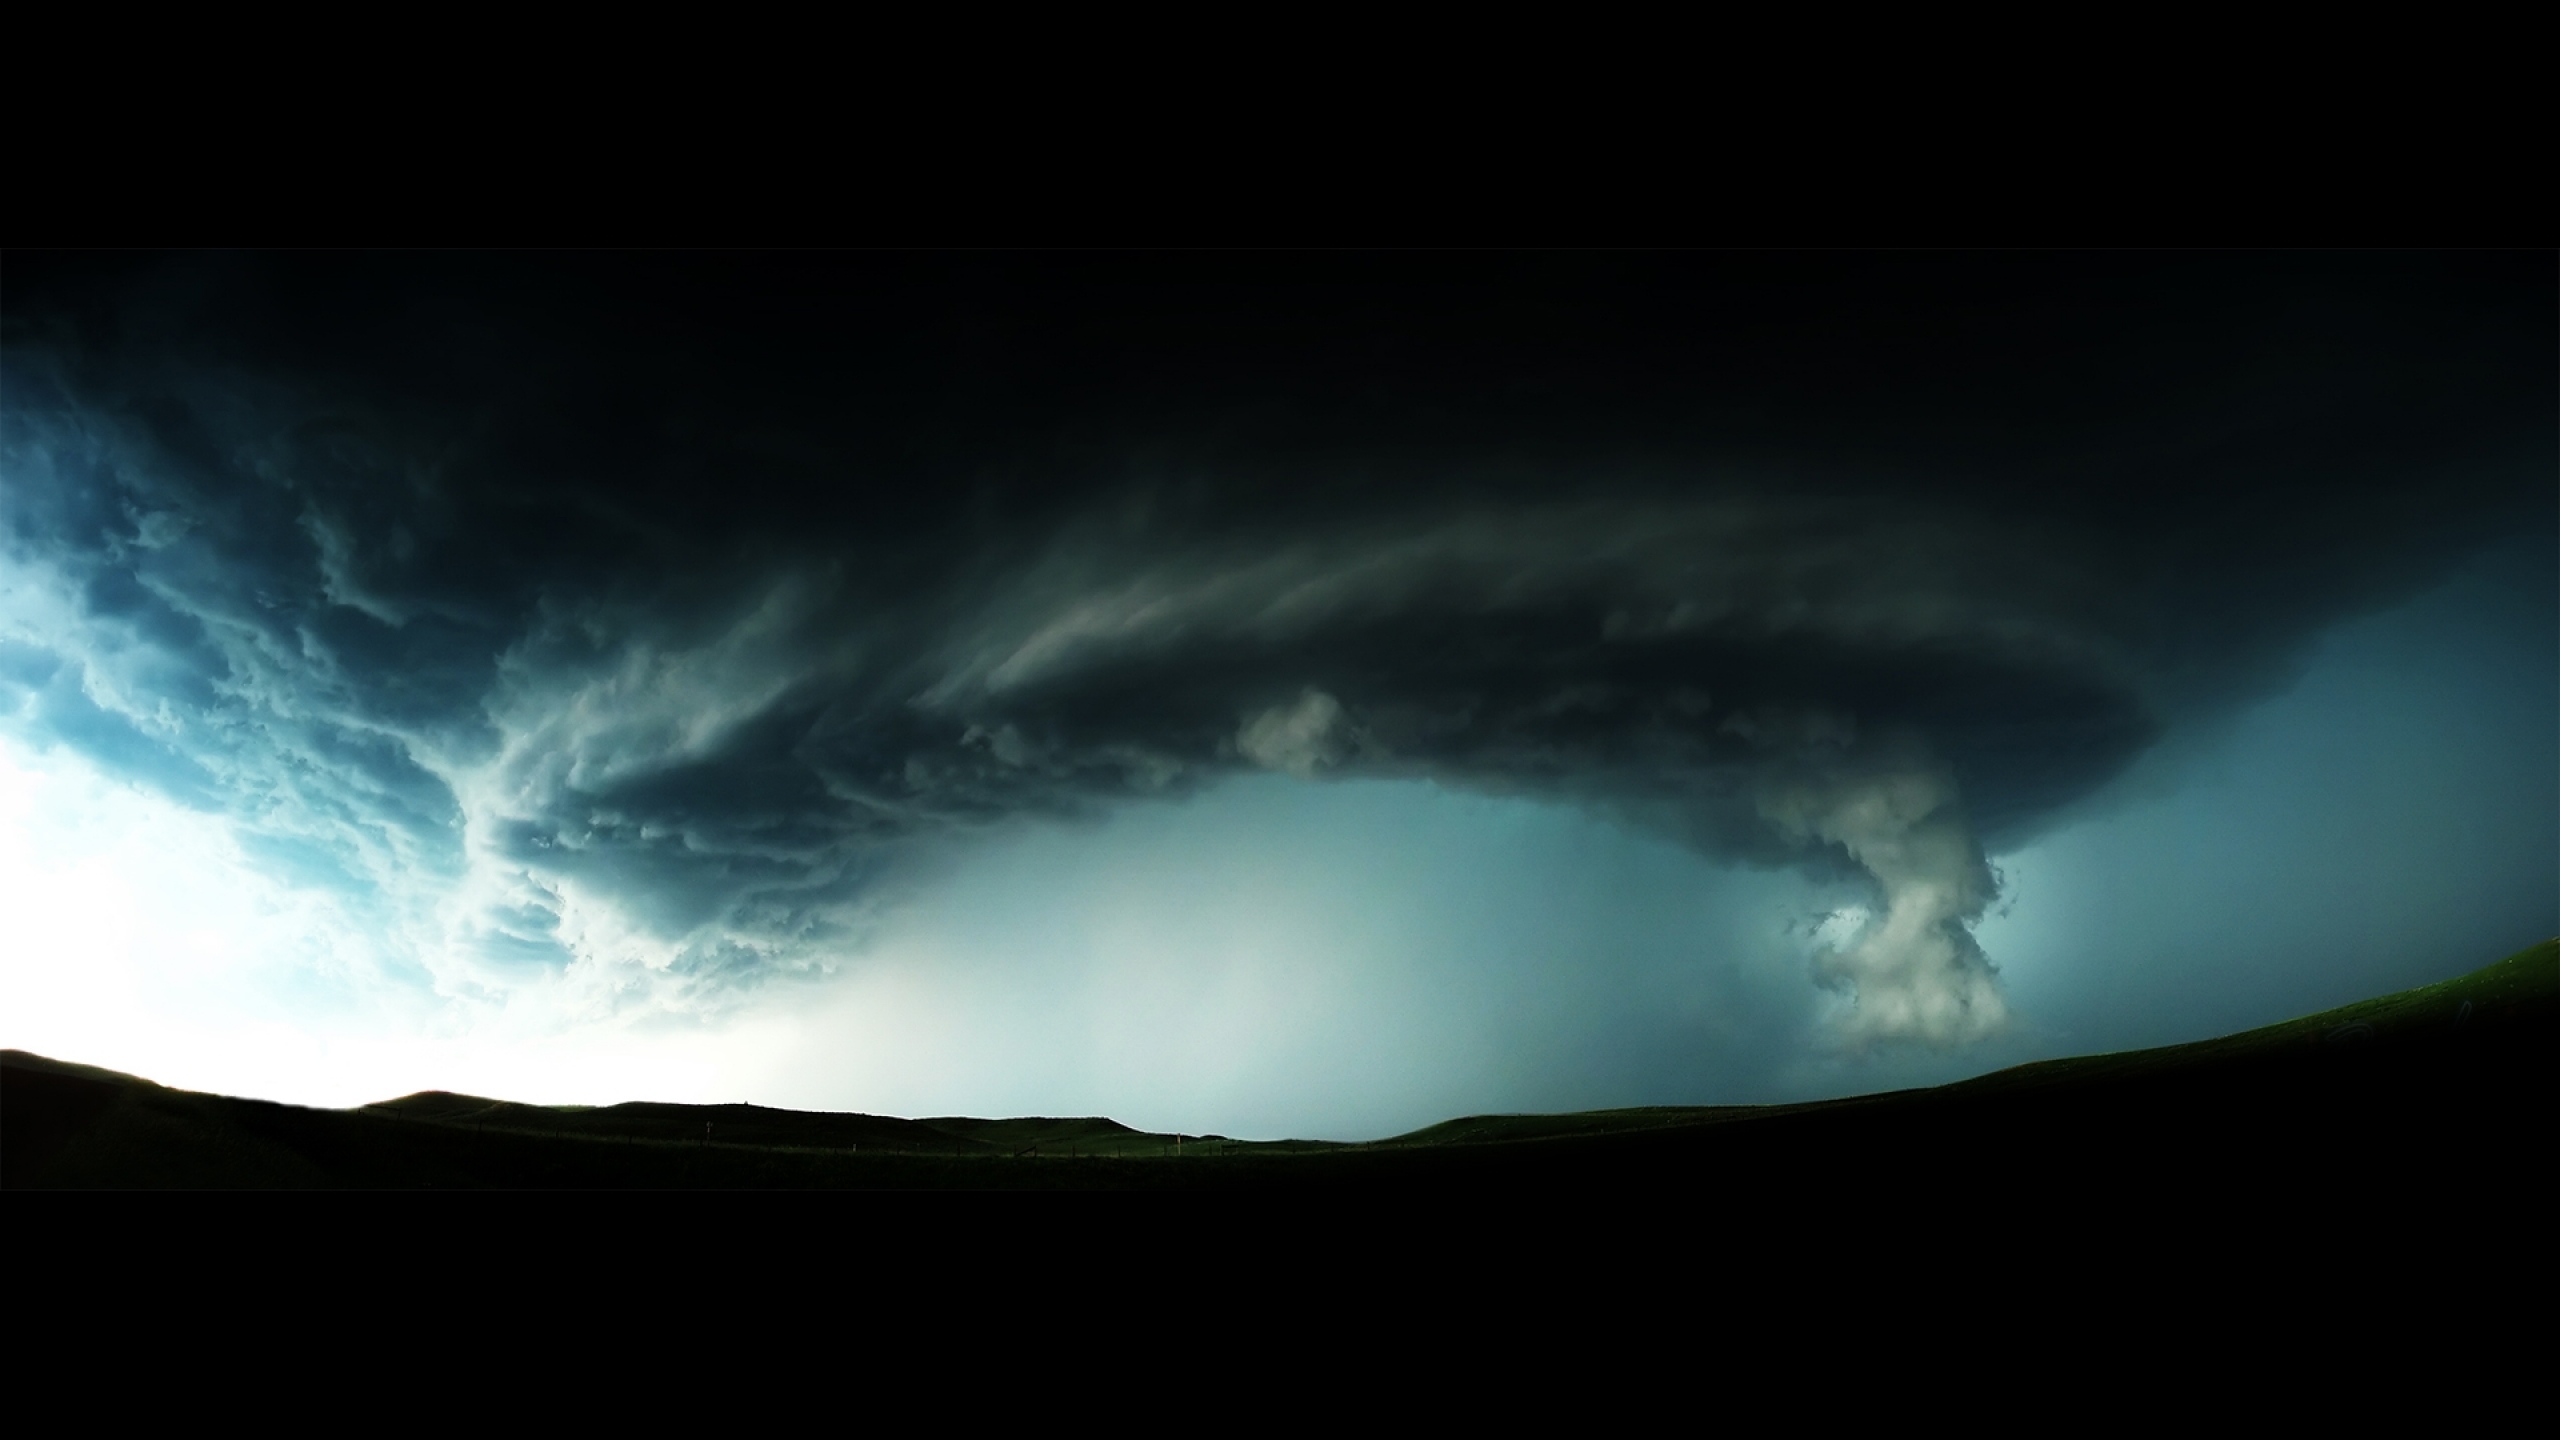 Free Download Storm Supercell 19x1080 Wallpaper High Resolution Wallpaper Download 2560x1440 For Your Desktop Mobile Tablet Explore 68 Supercell Wallpaper Supercell Wallpaper